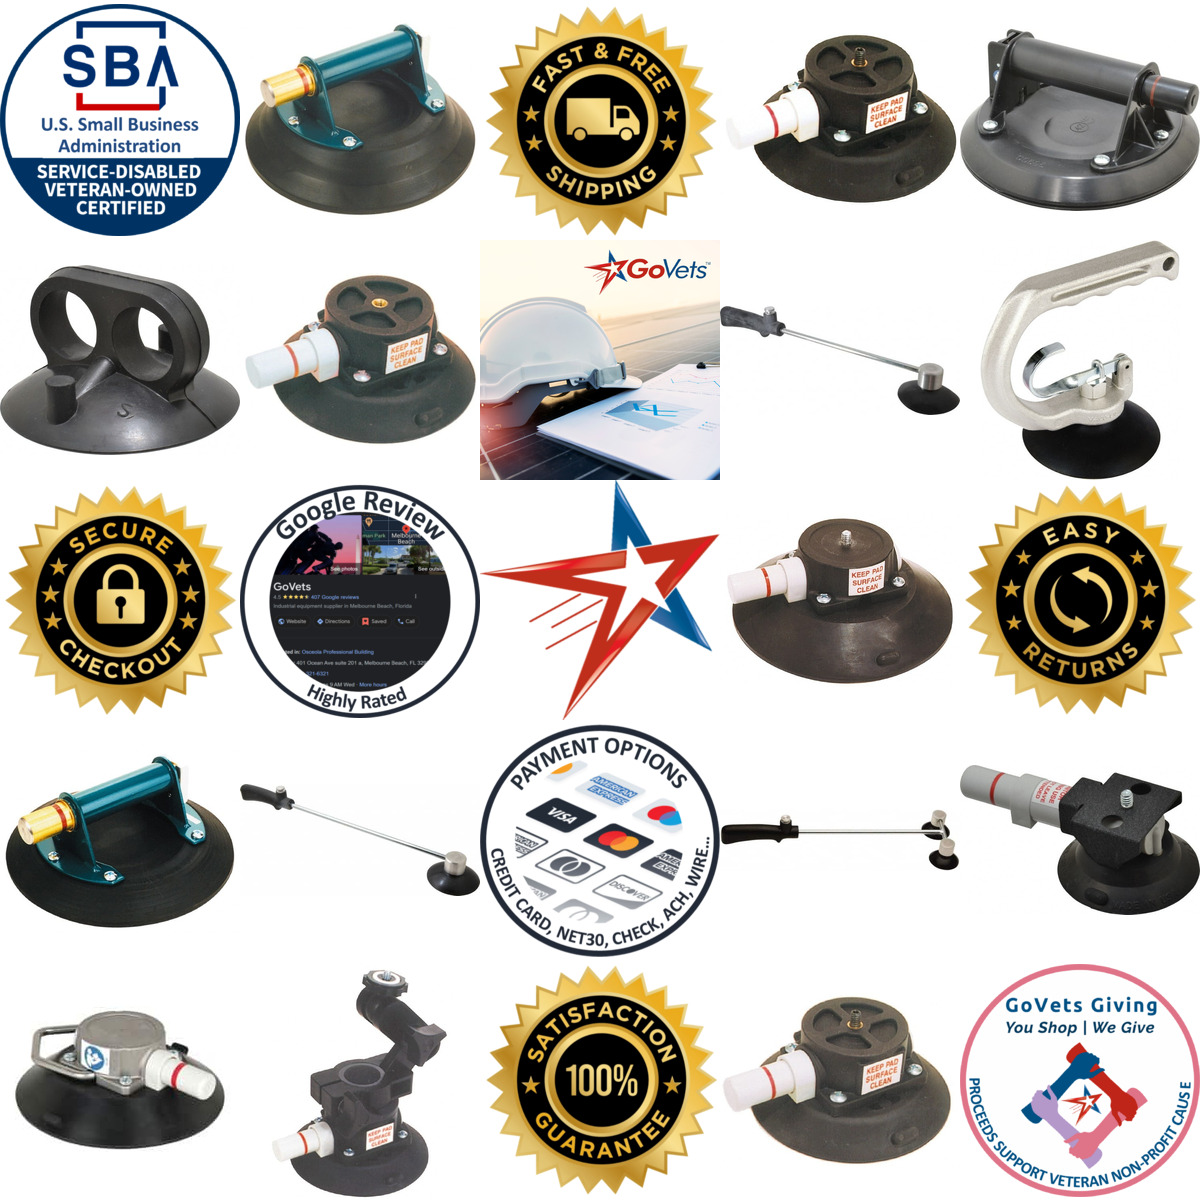 A selection of Vacuum Lifters products on GoVets